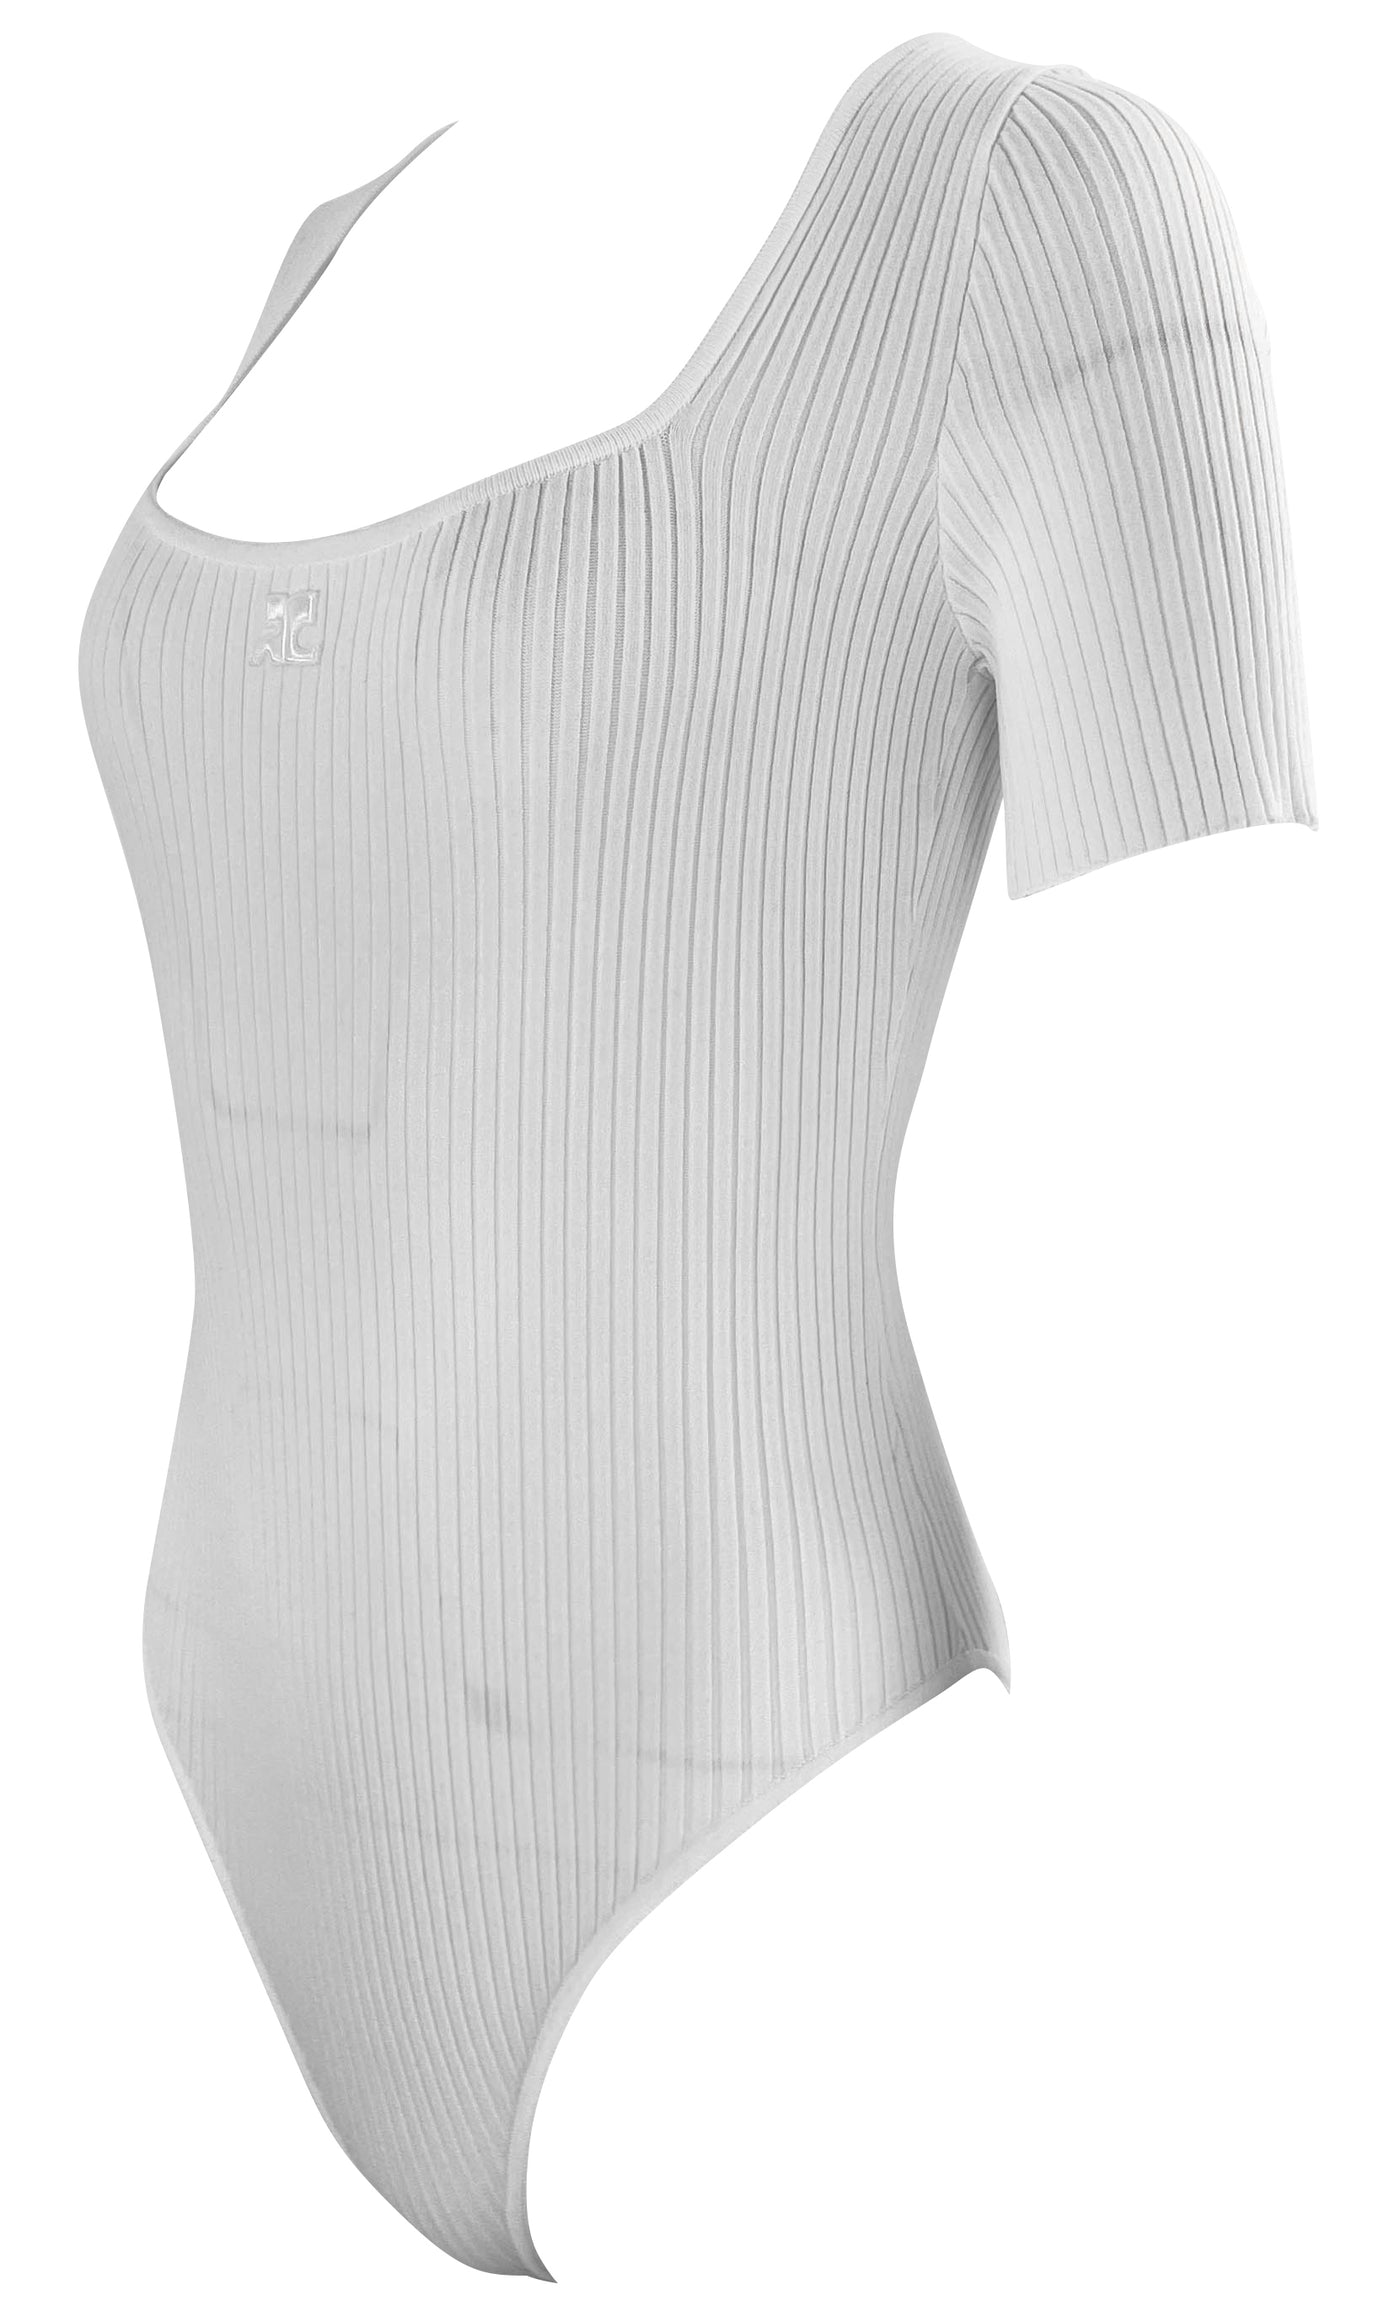 courrèges Square Neck Ribbed Bodysuit in White - Discounts on courrèges at UAL